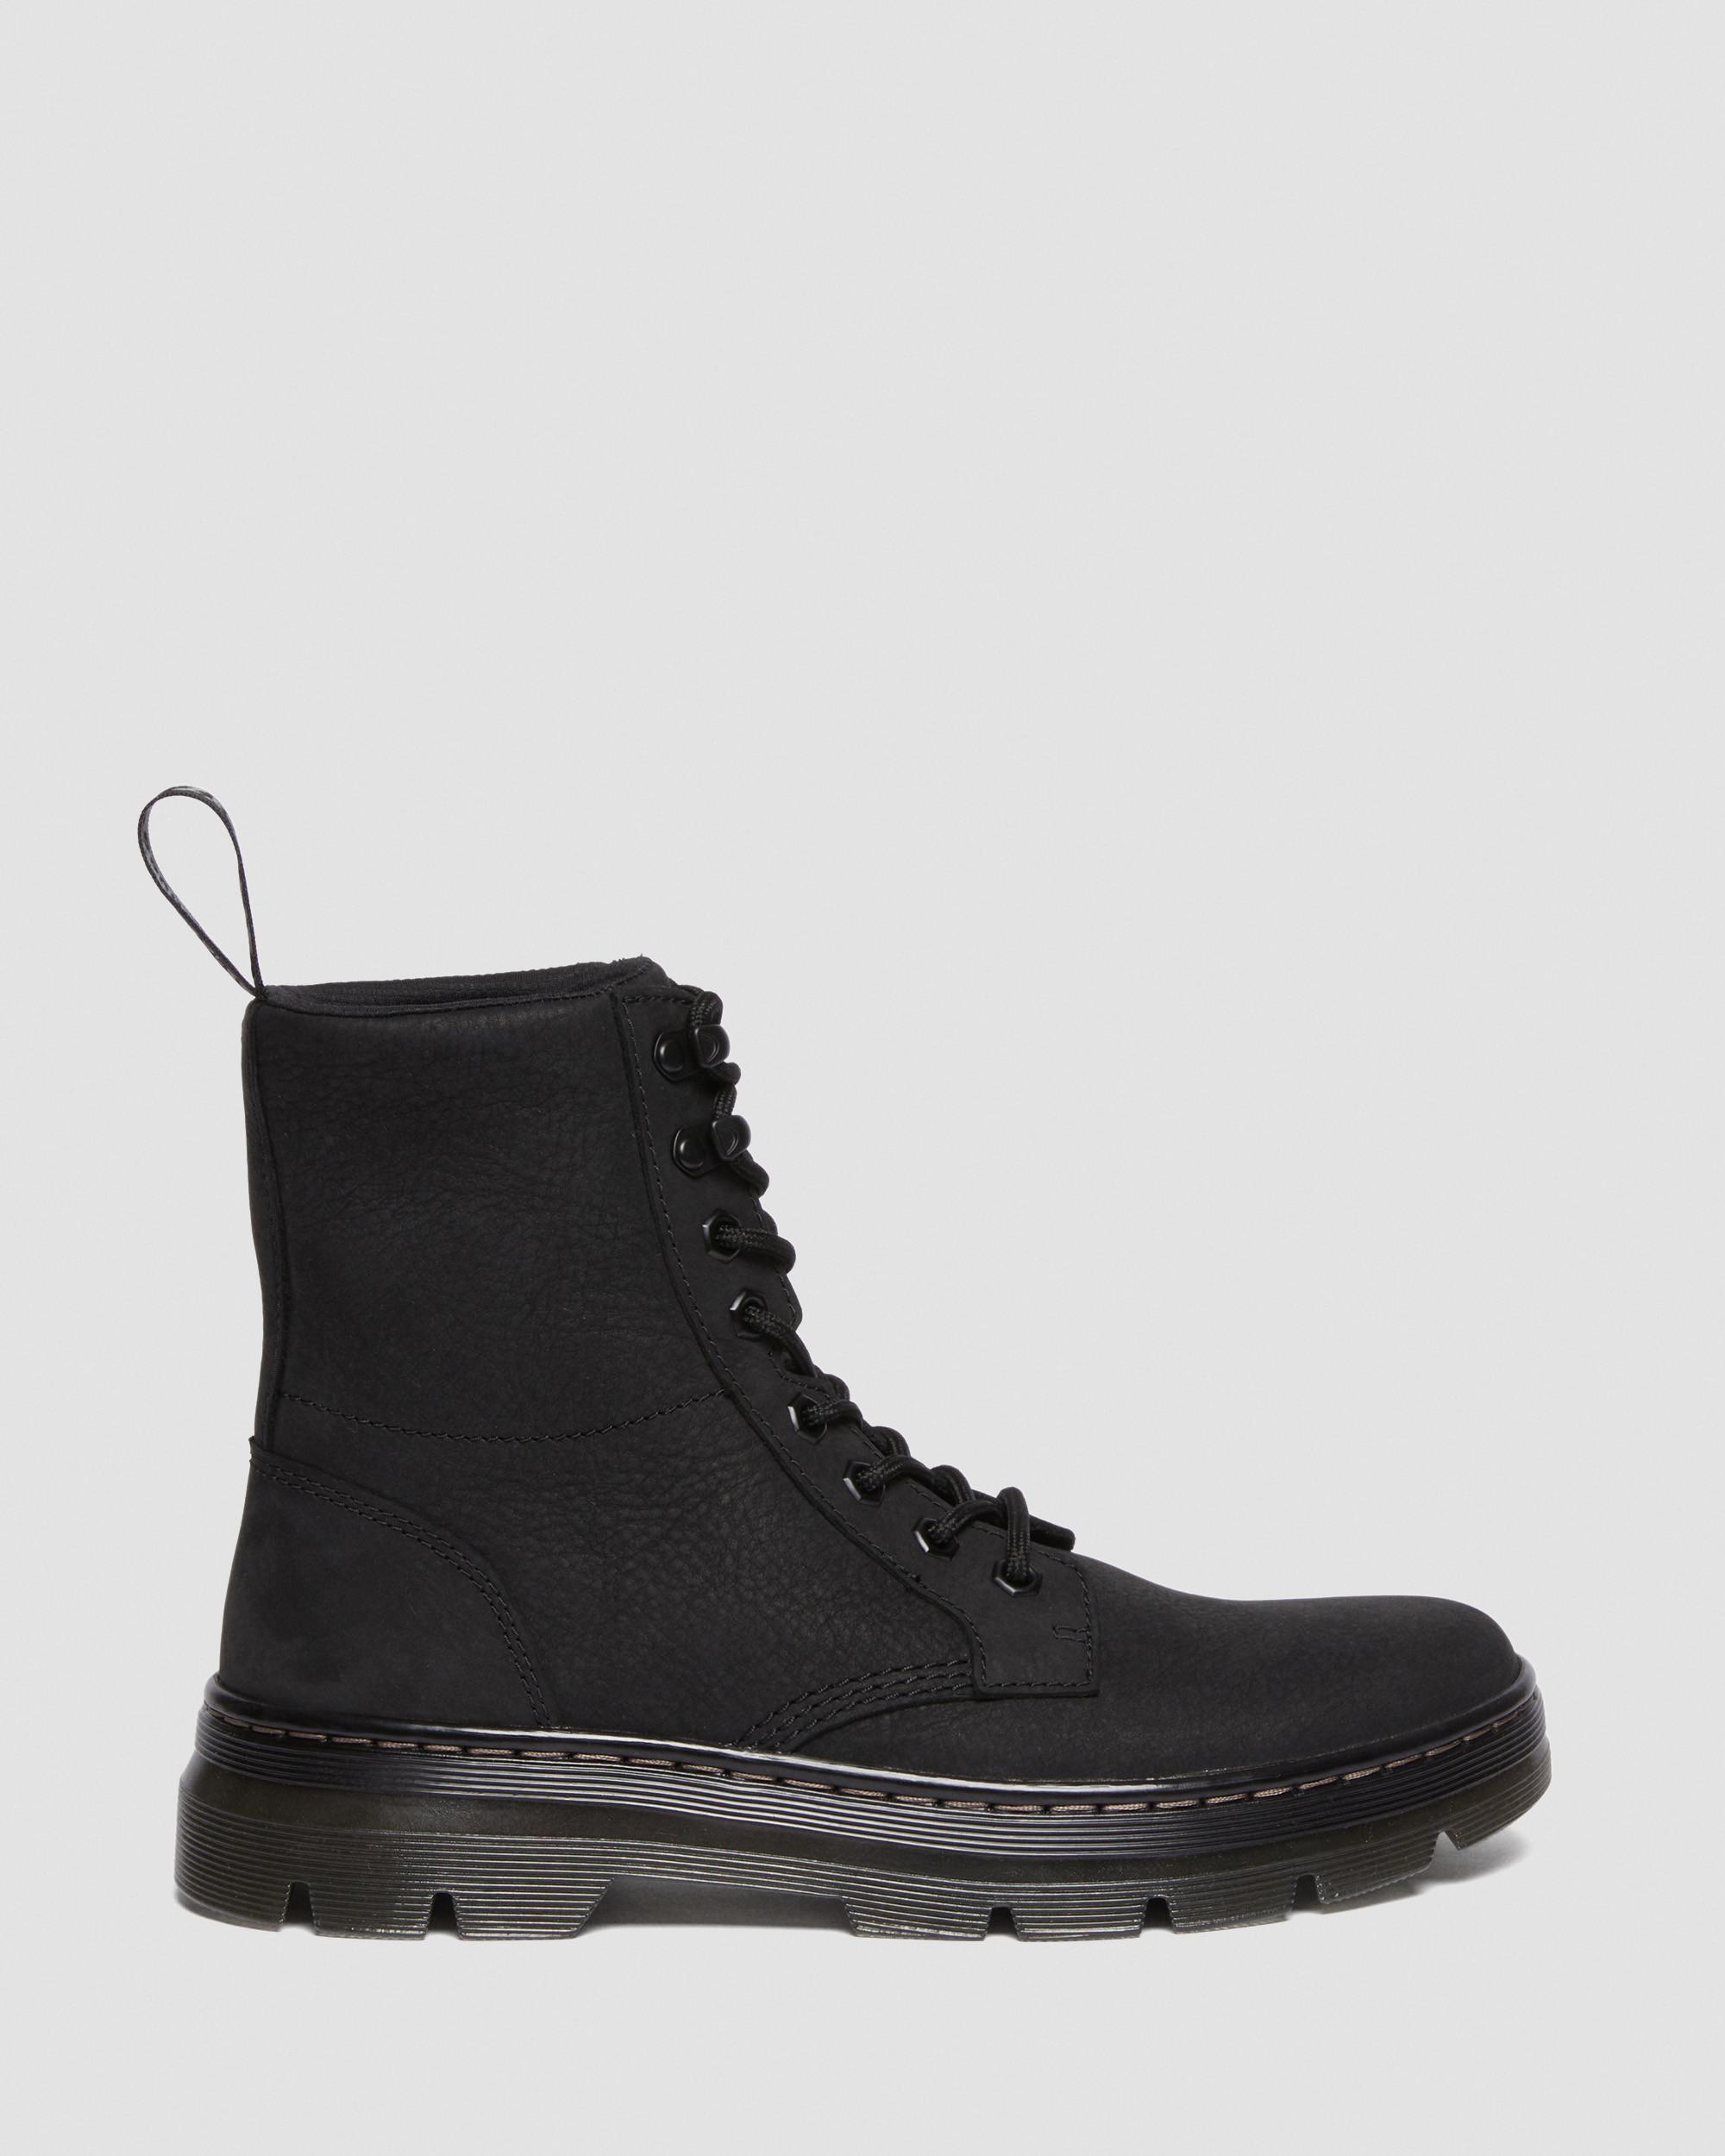 Combs Tech Milled Nubuck Utility Boots in Black | Dr. Martens